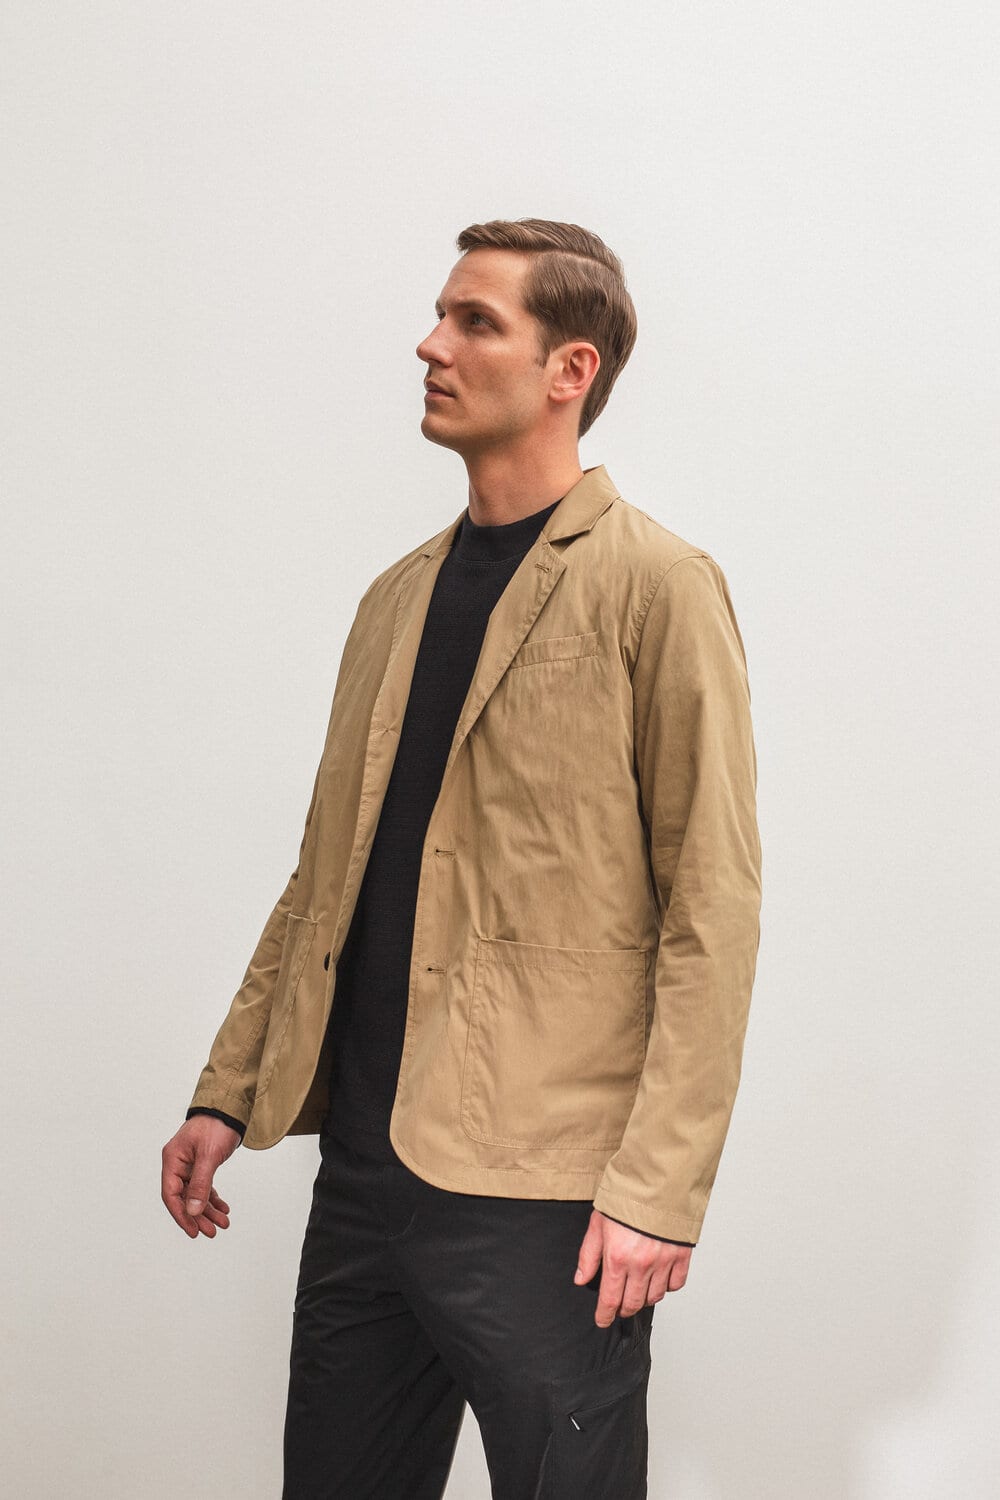 lookbook norse projects sp20 11